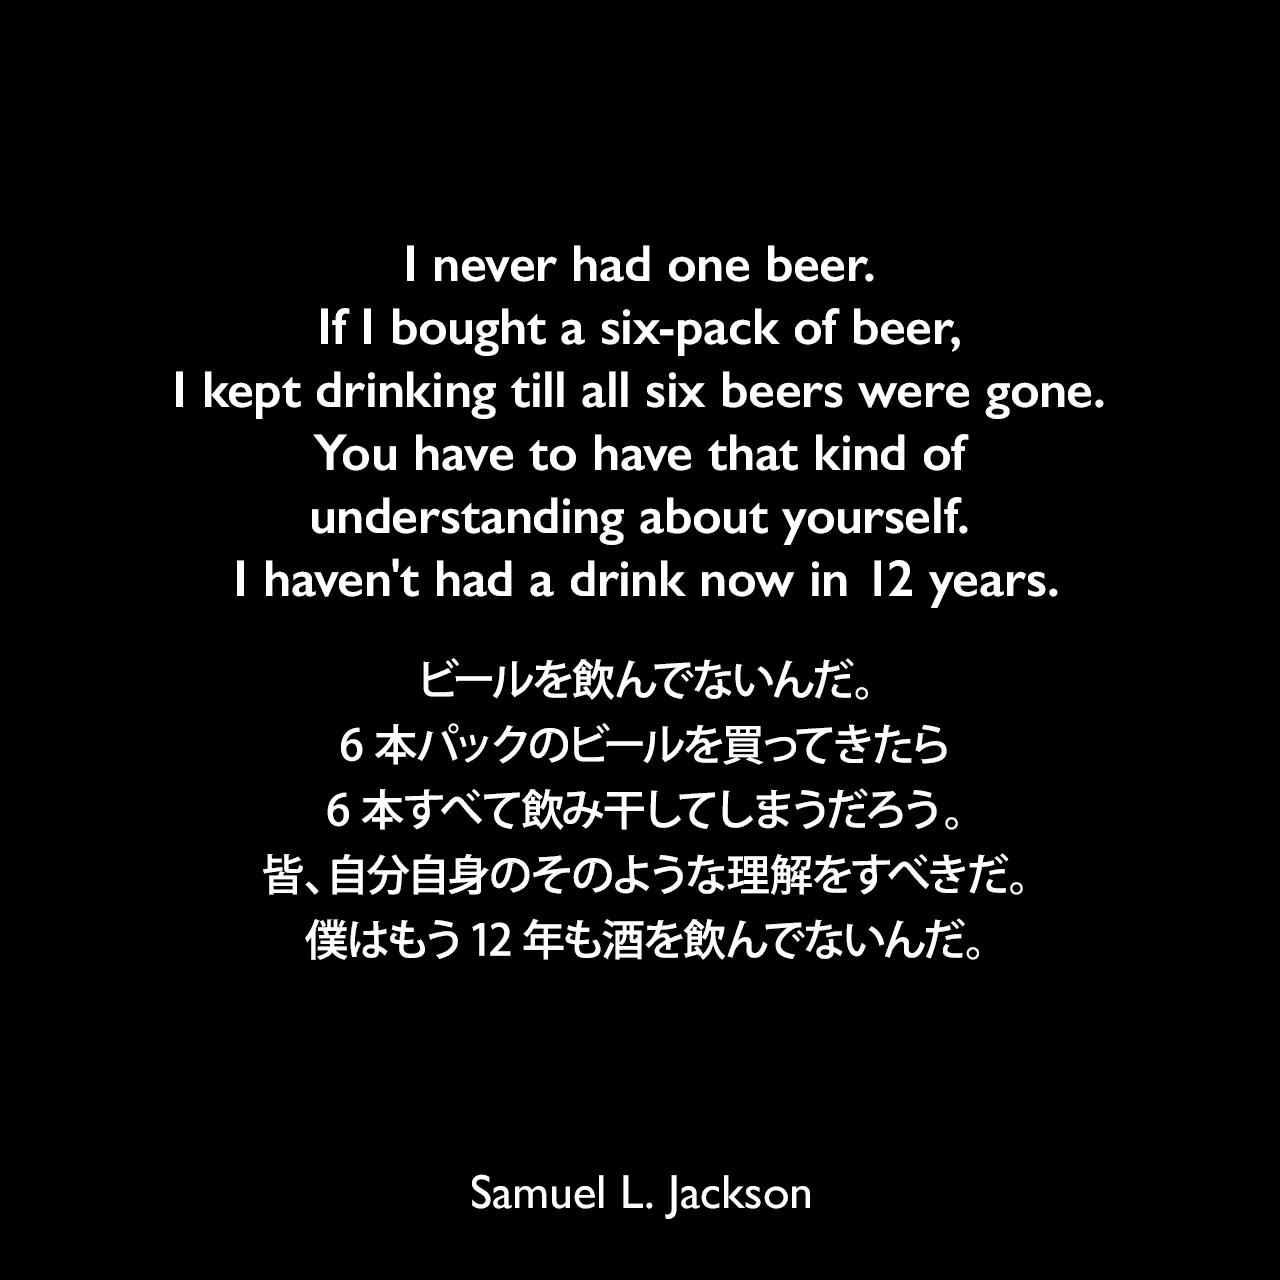 I never had one beer. If I bought a six-pack of beer, I kept drinking till all six beers were gone. You have to have that kind of understanding about yourself. I haven't had a drink now in 12 years.ビールを飲んでないんだ。6本パックのビールを買ってきたら6本すべて飲み干してしまうだろう。皆、自分自身のそのような理解をすべきだ。僕はもう12年も酒を飲んでないんだ。Samuel Leroy Jackson